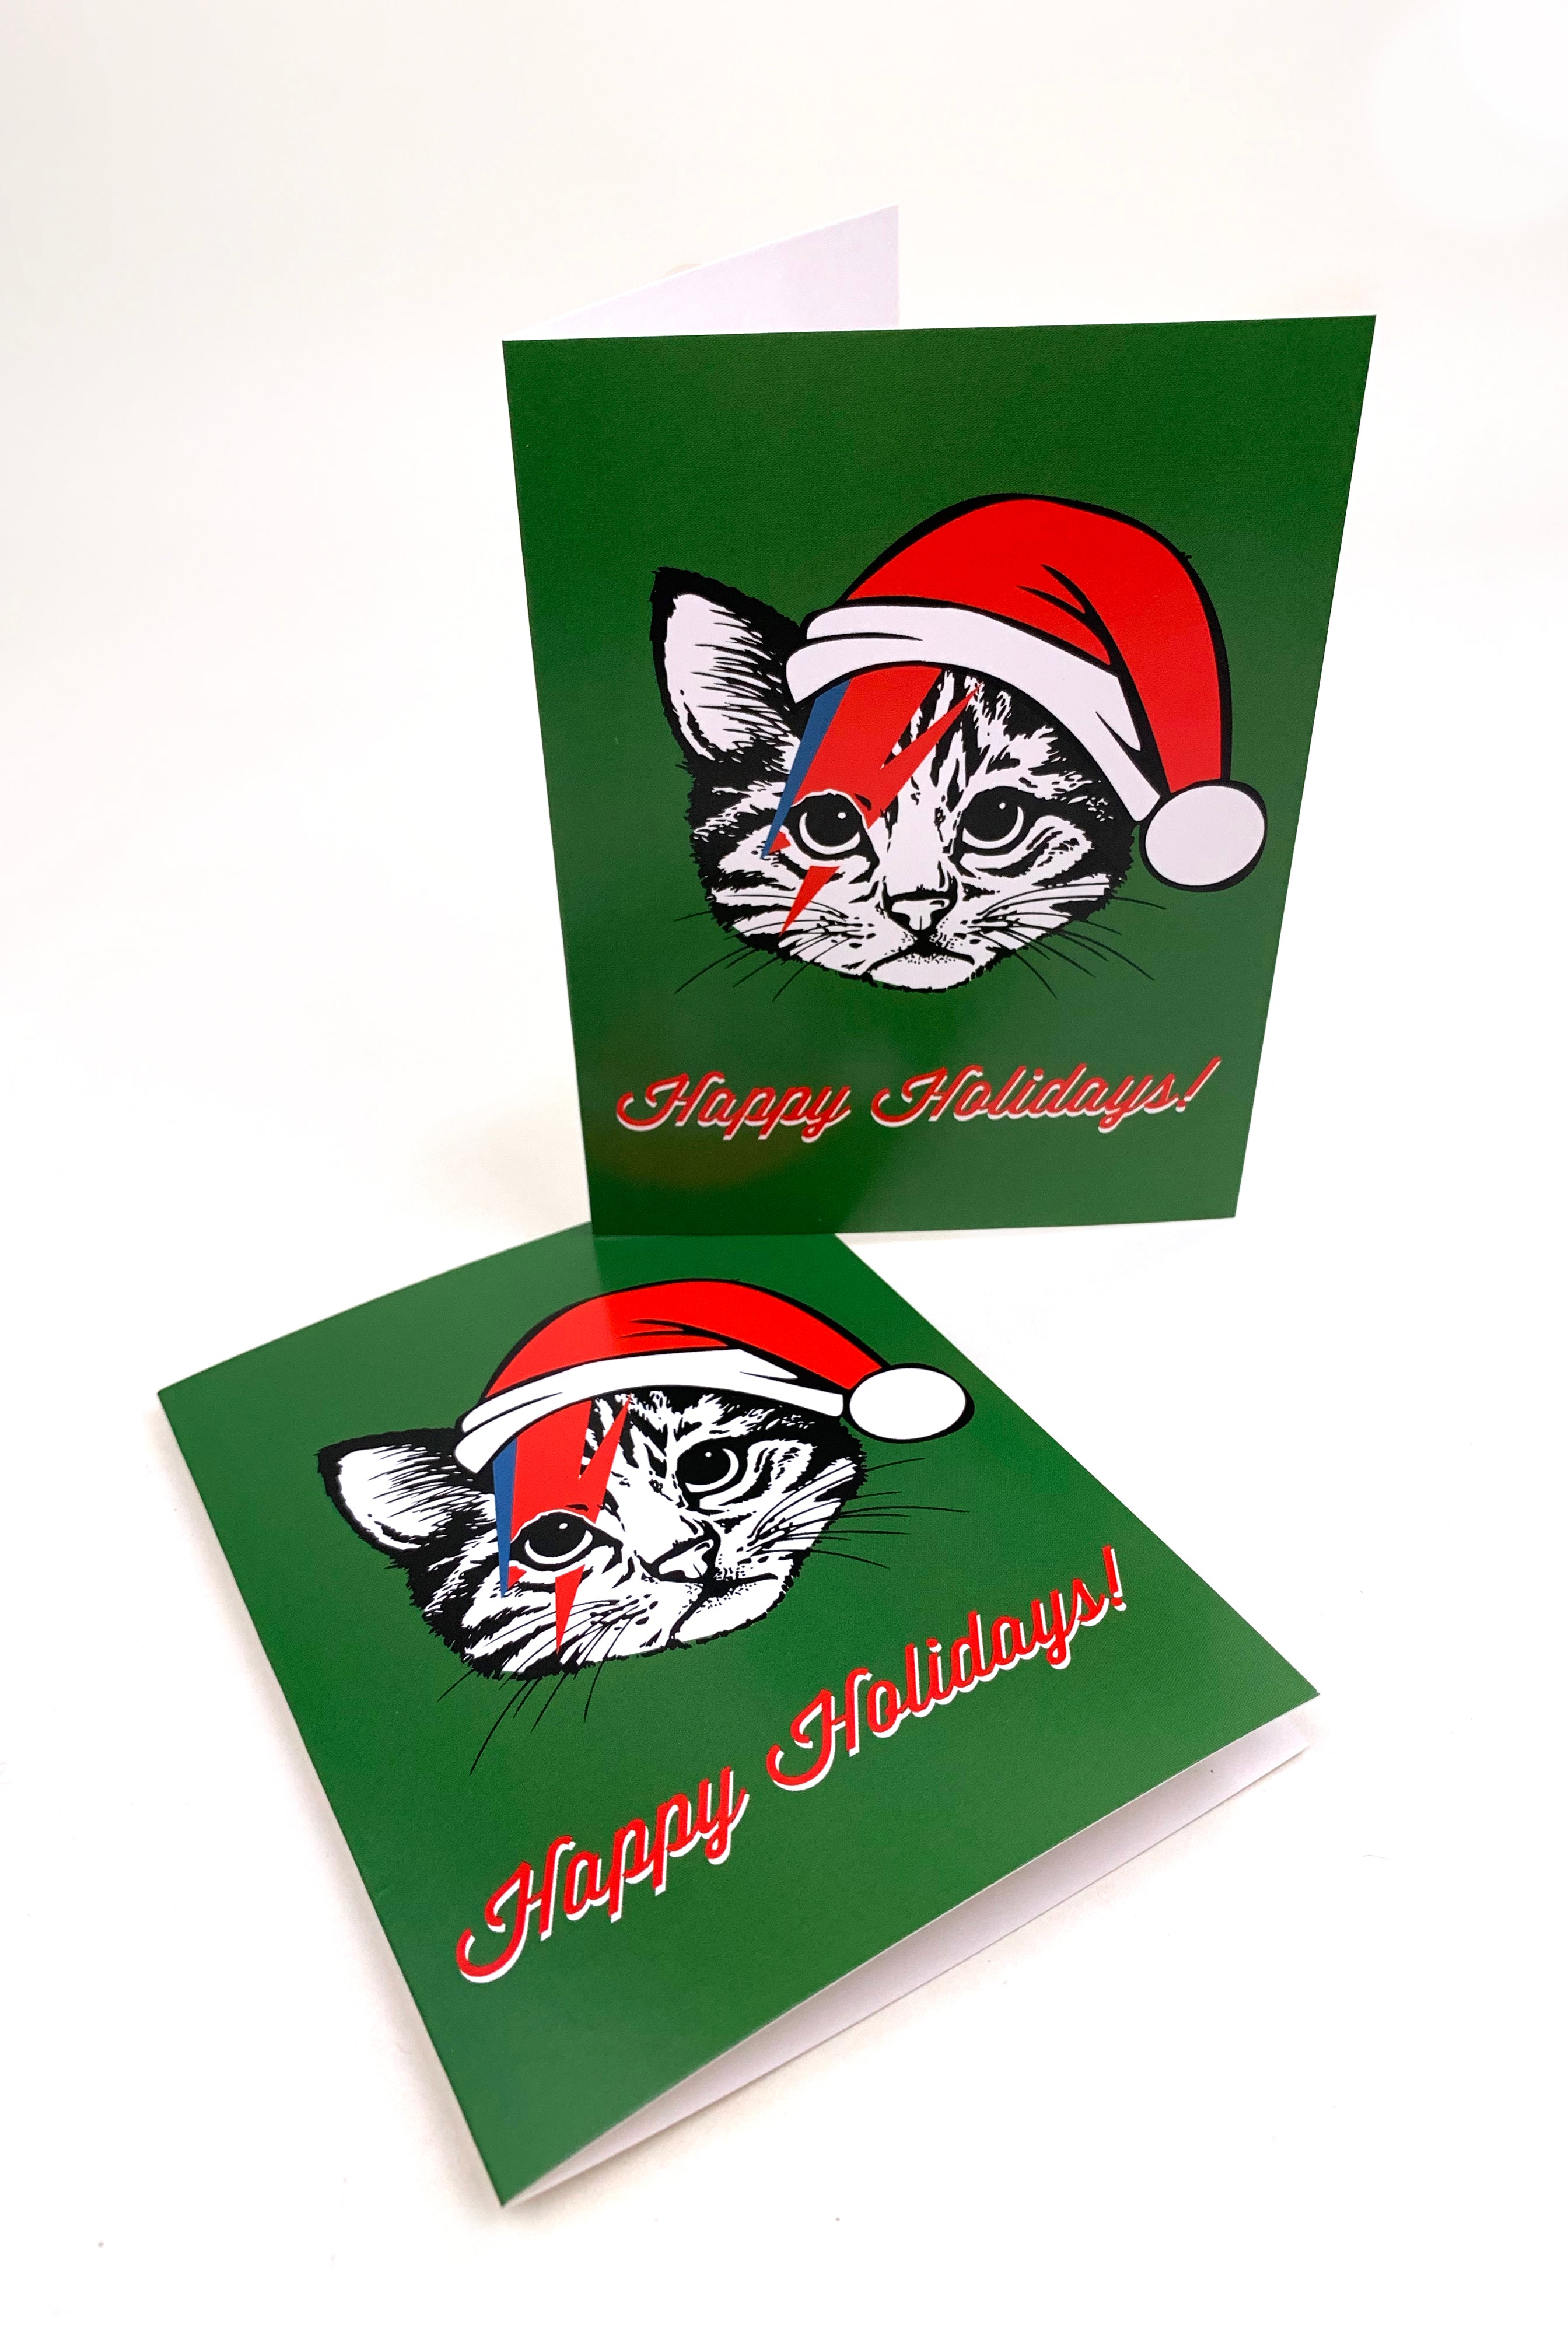 Kitty Stardust Holiday Card